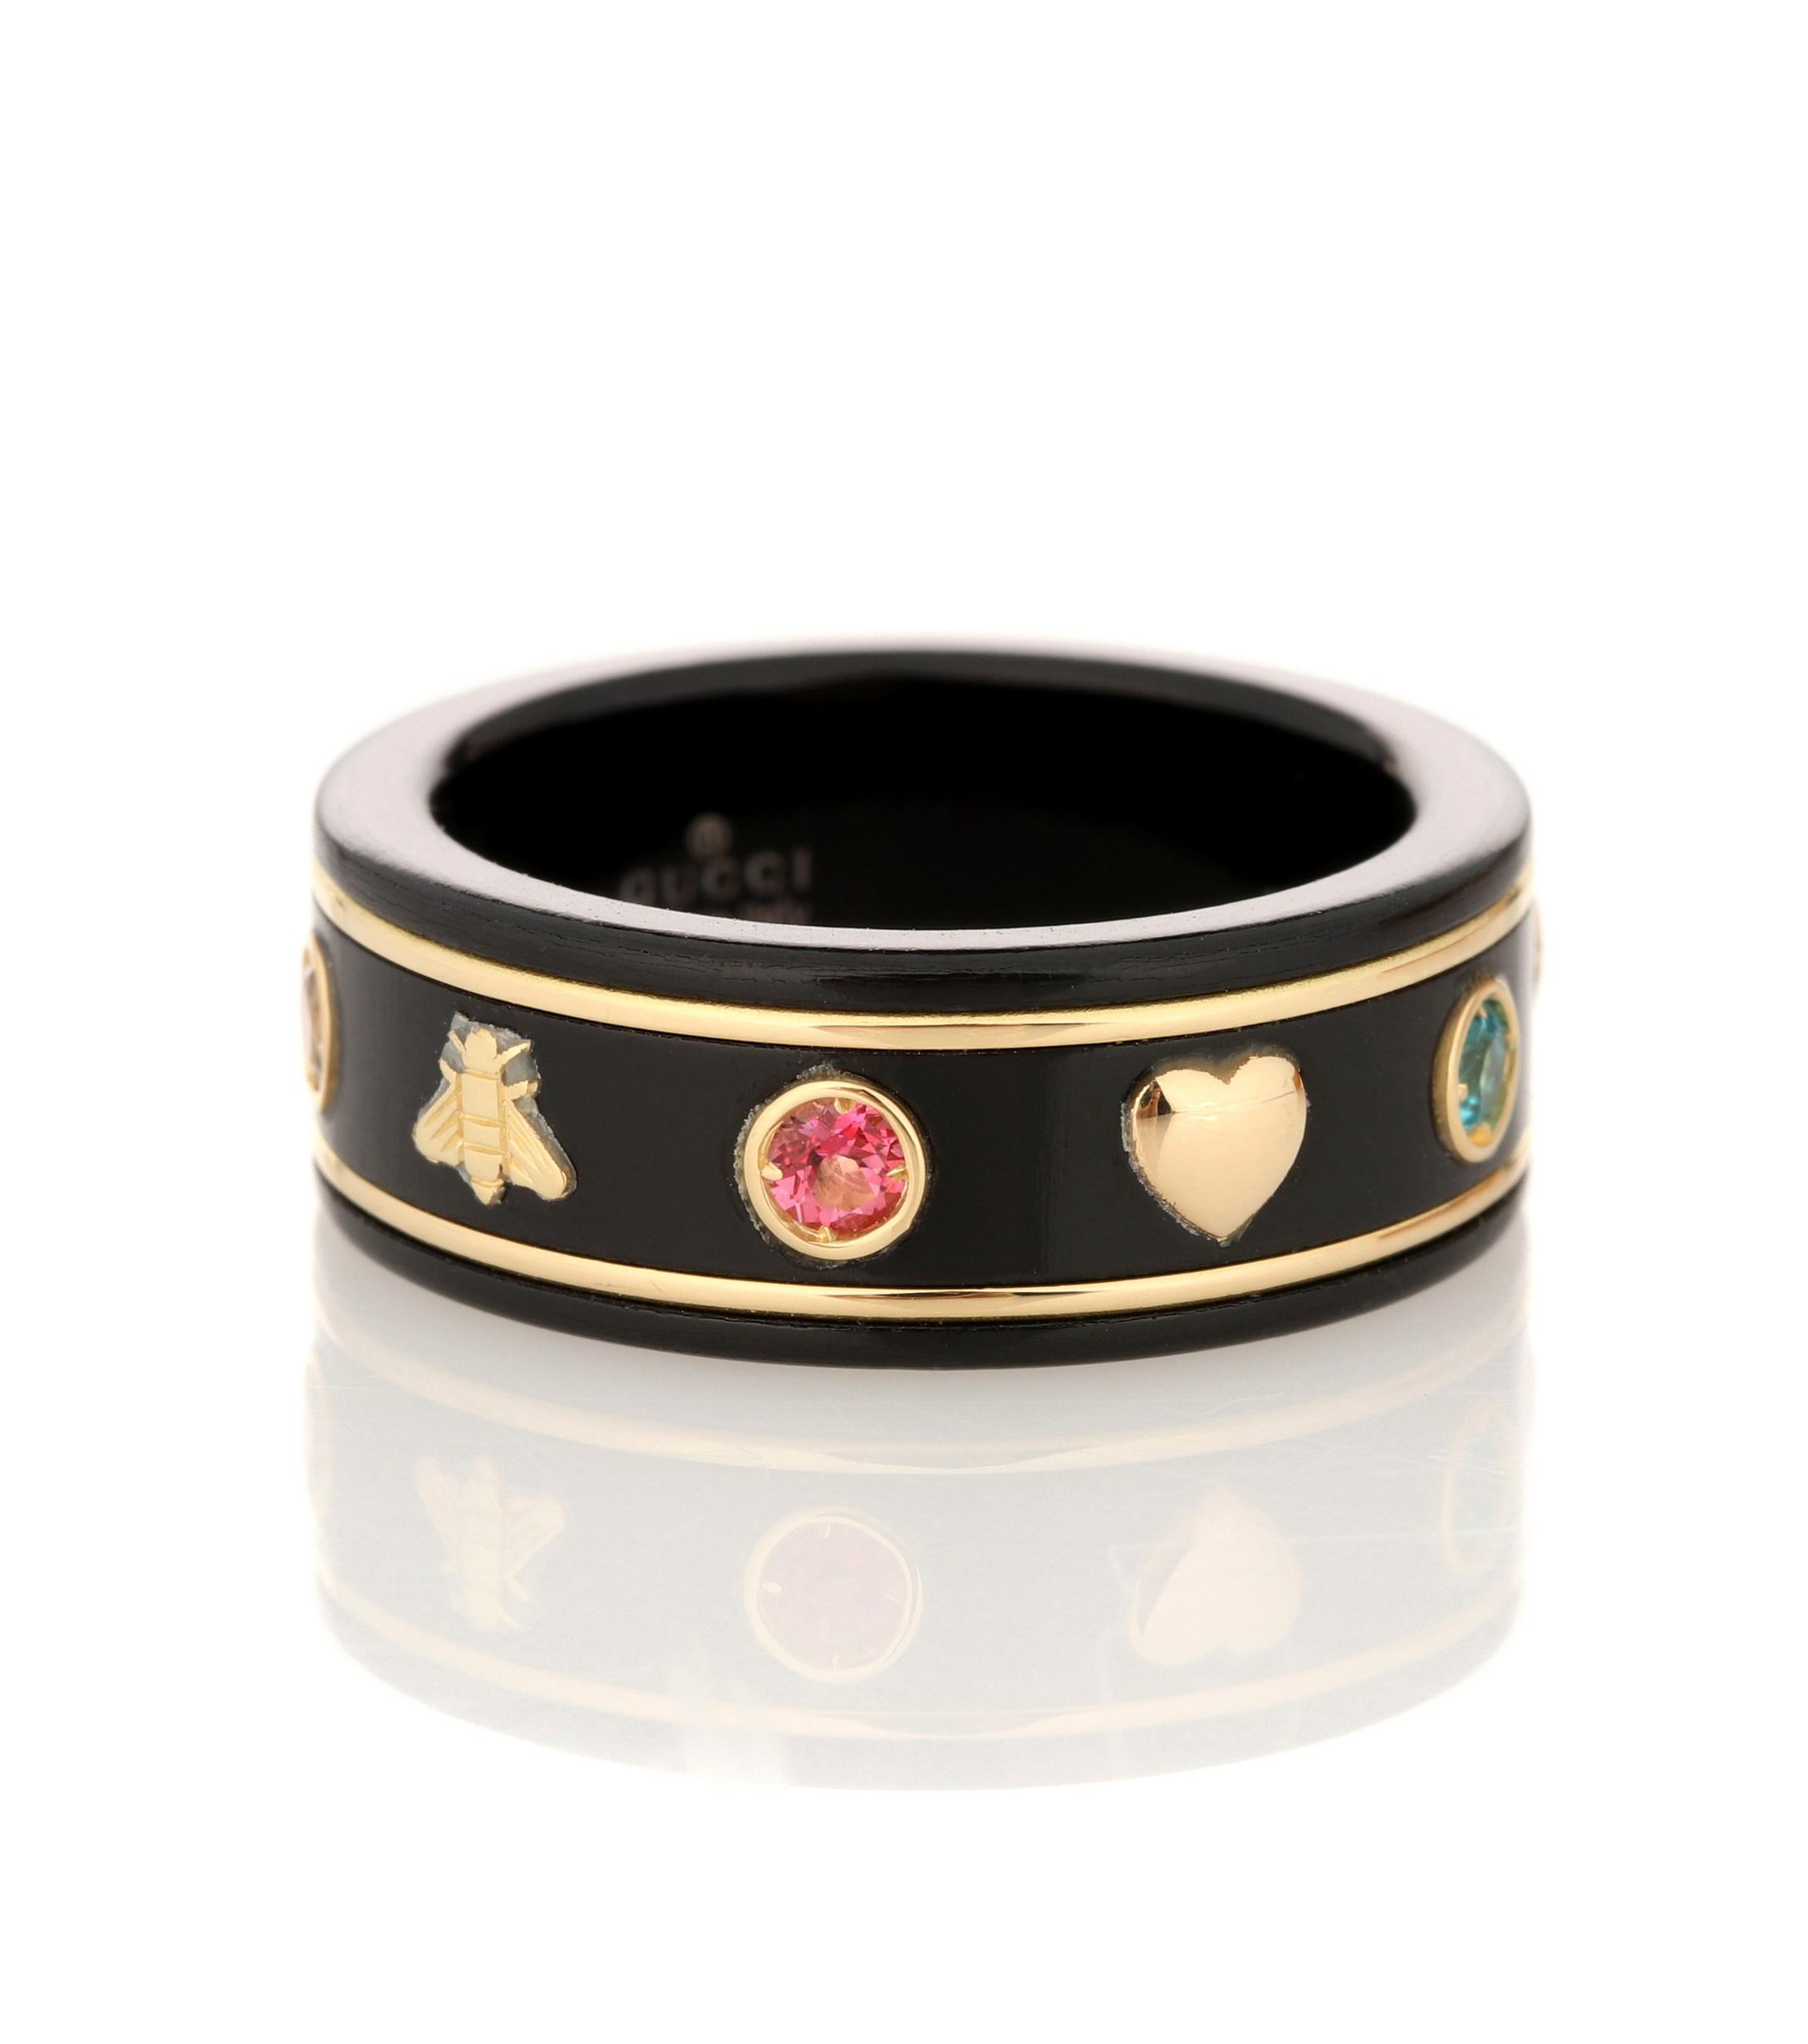 Lyst Gucci Icon 18kt Gold Ring With Gemstones in Black